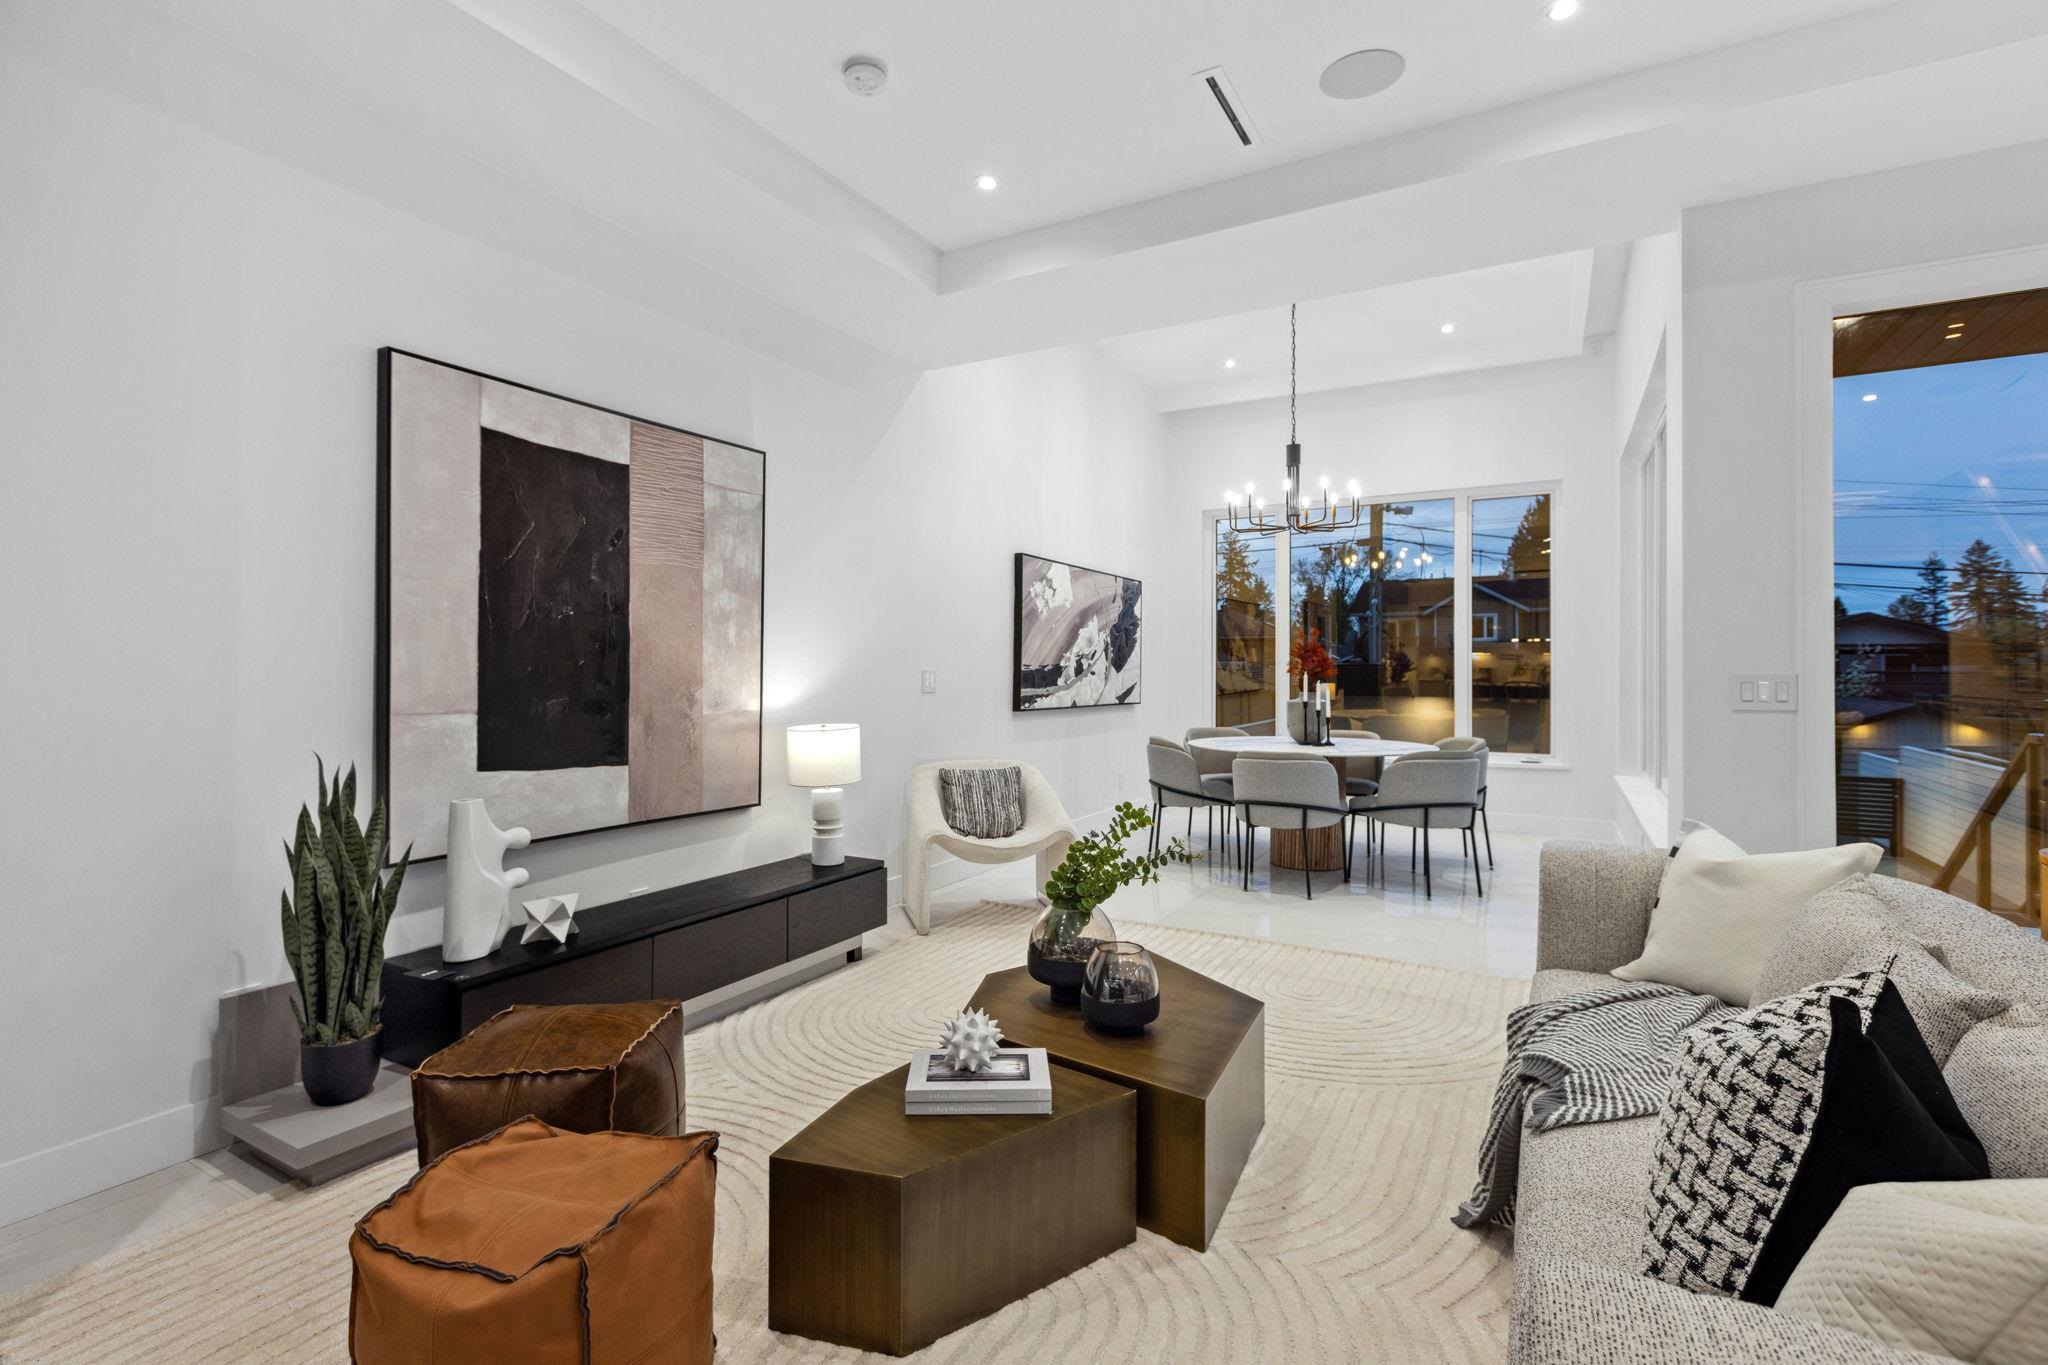 Listing image of 325 W 22ND STREET